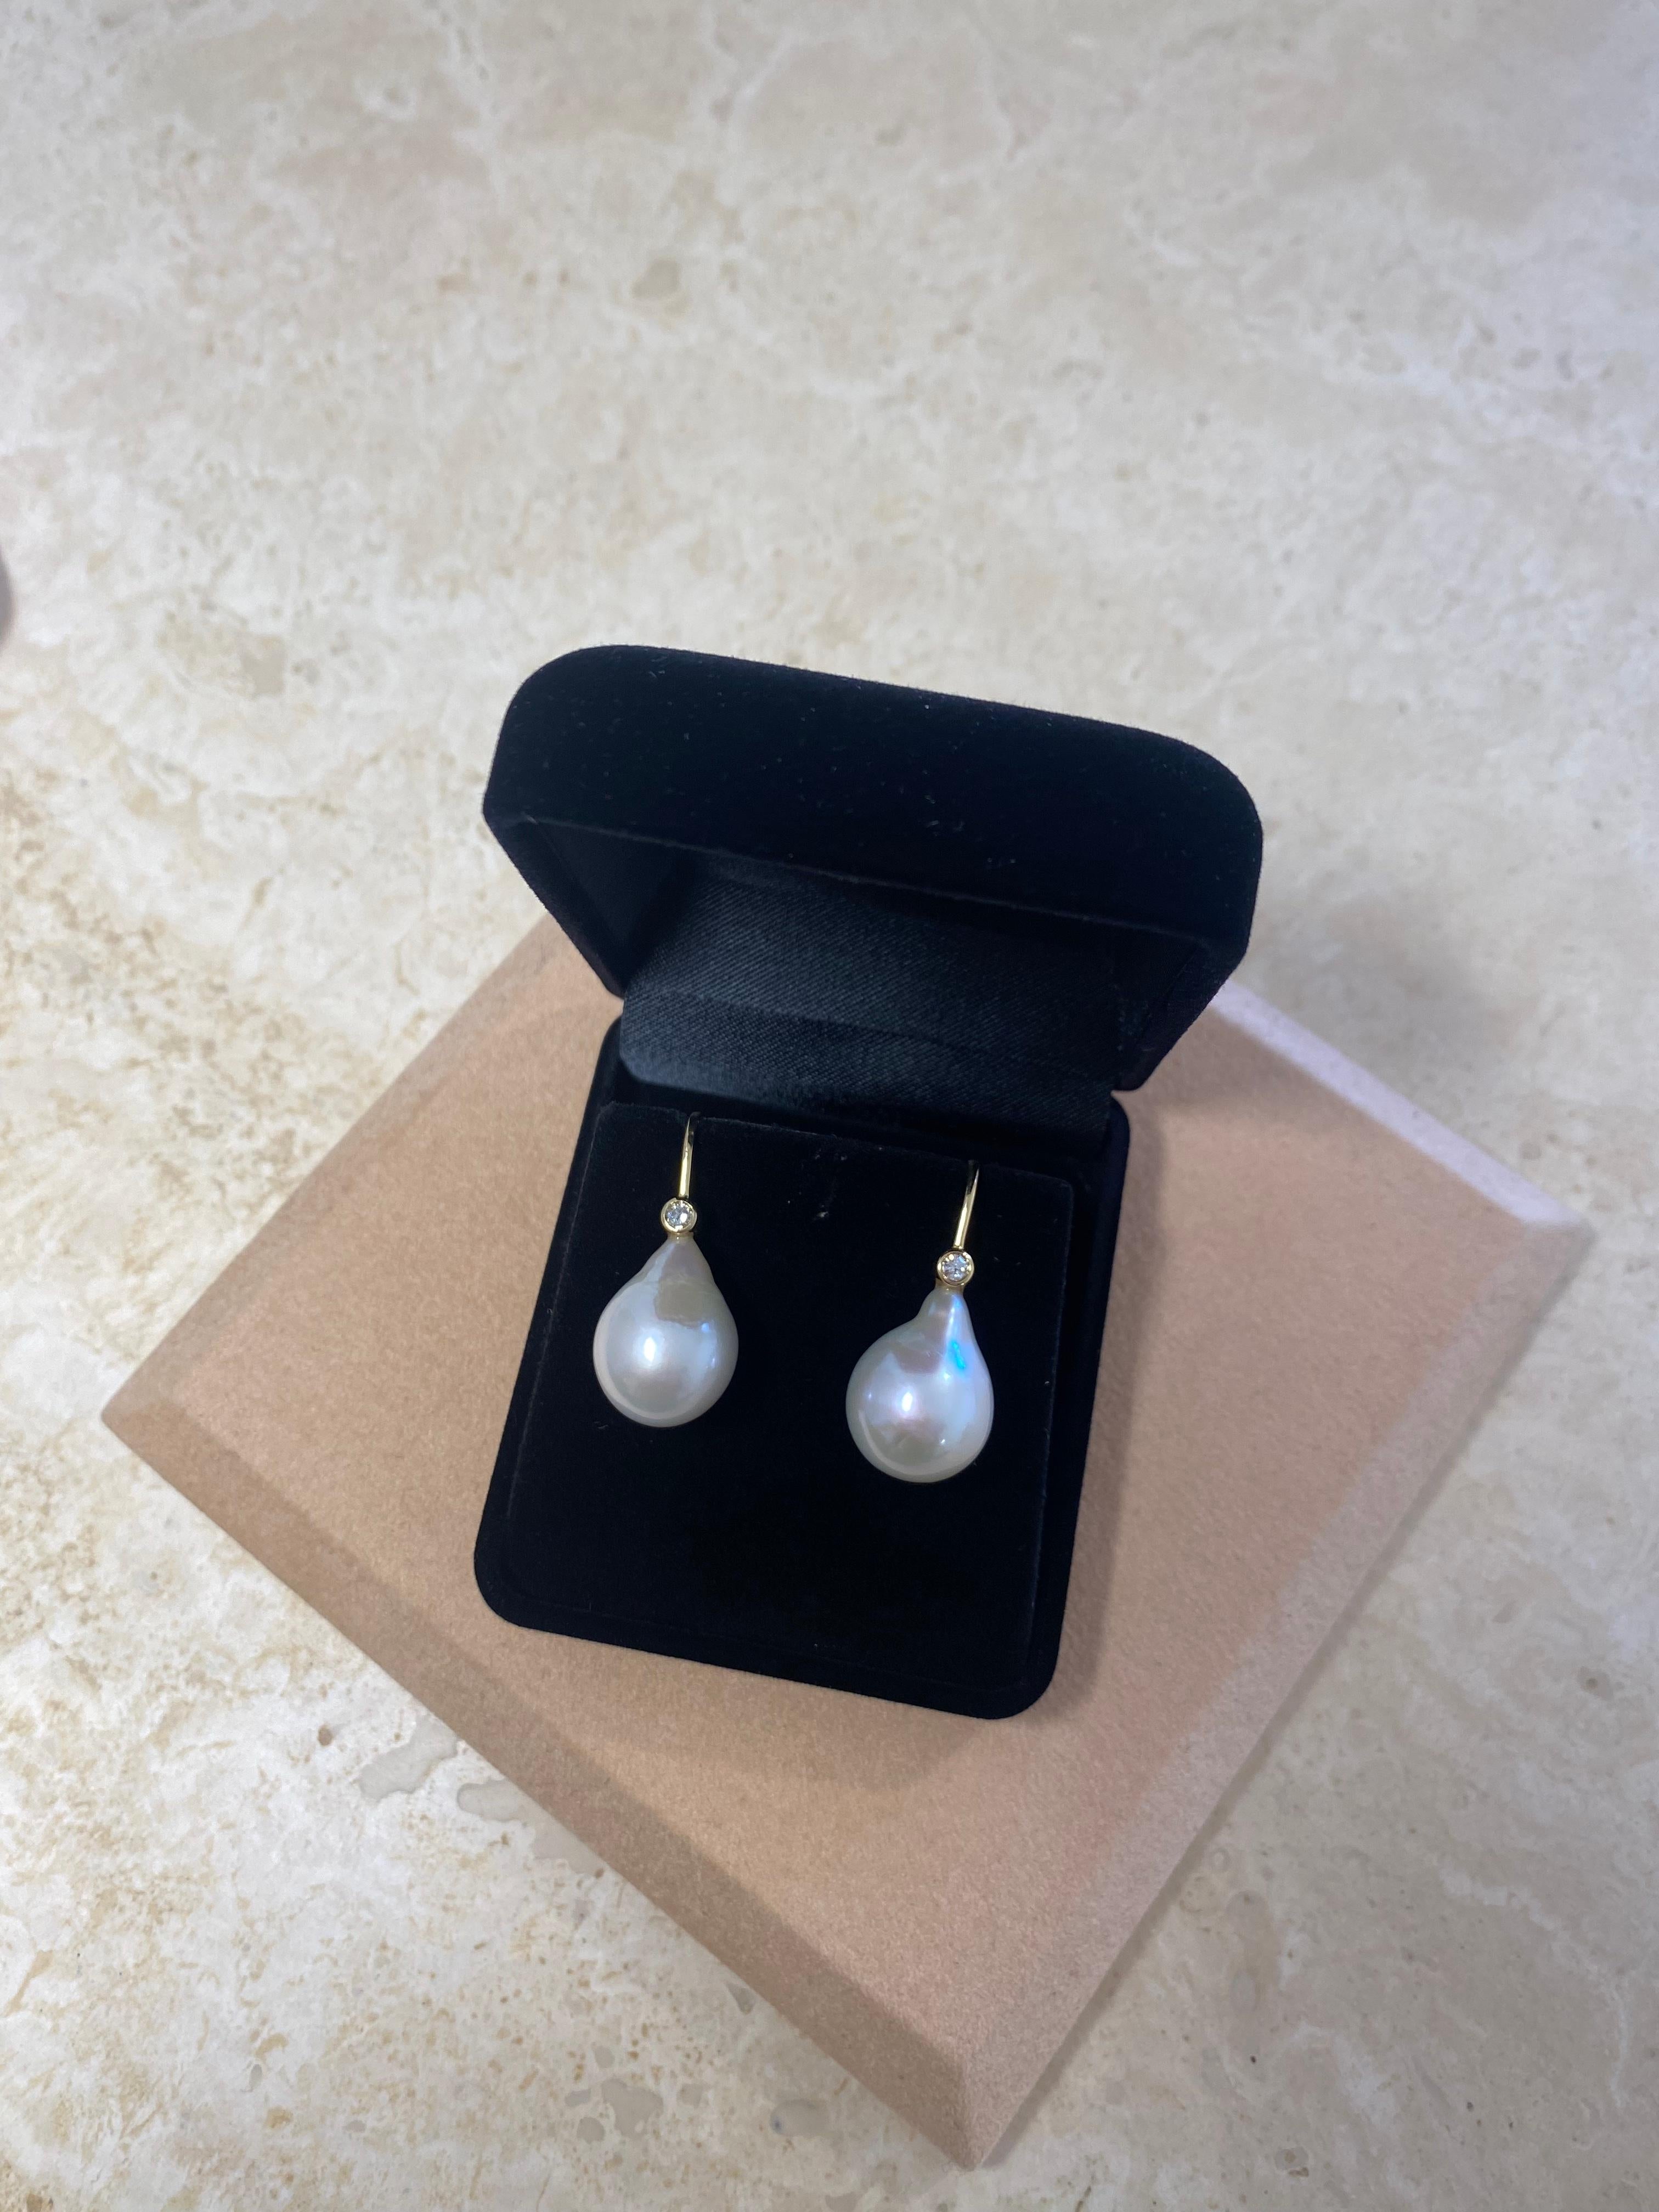 Women's or Men's Baroque Pearls and Diamonds Earrings, by Michelle Massoura